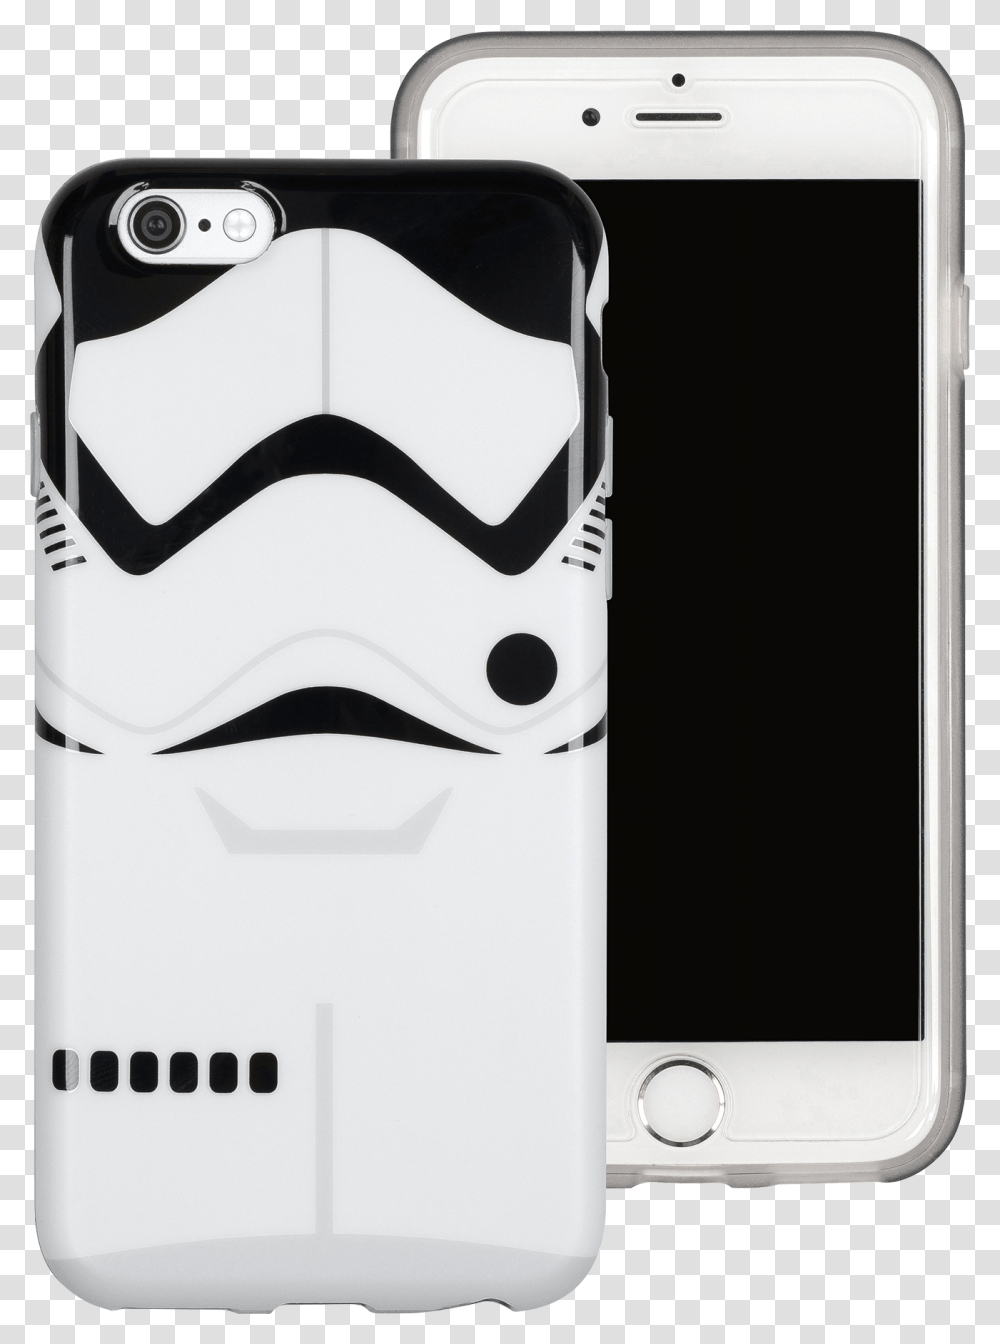 Star Wars Tfa Stormtrooper Iphone 66s Cover Image Iphone 6 Stormtrooper Cover, Mobile Phone Transparent Png